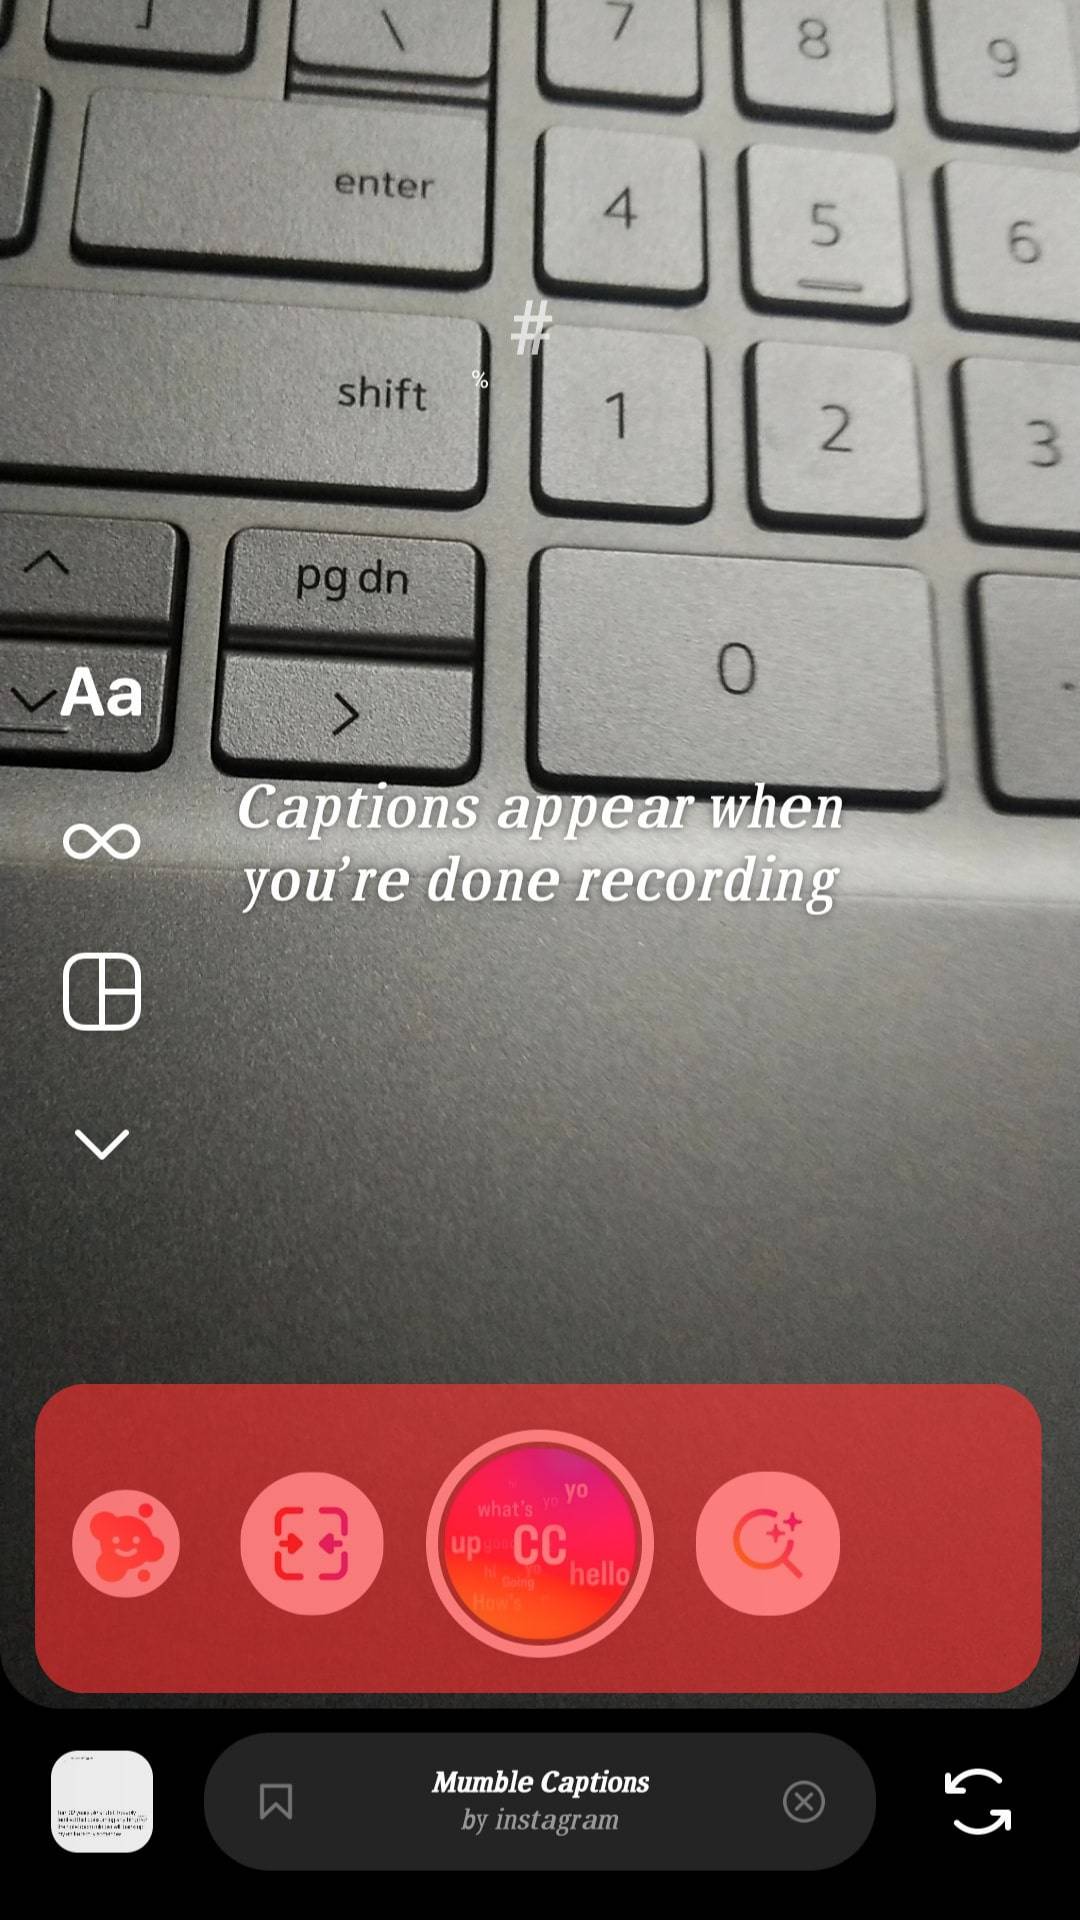 Scroll To The End Of The Filters Next To The Shutter Button.